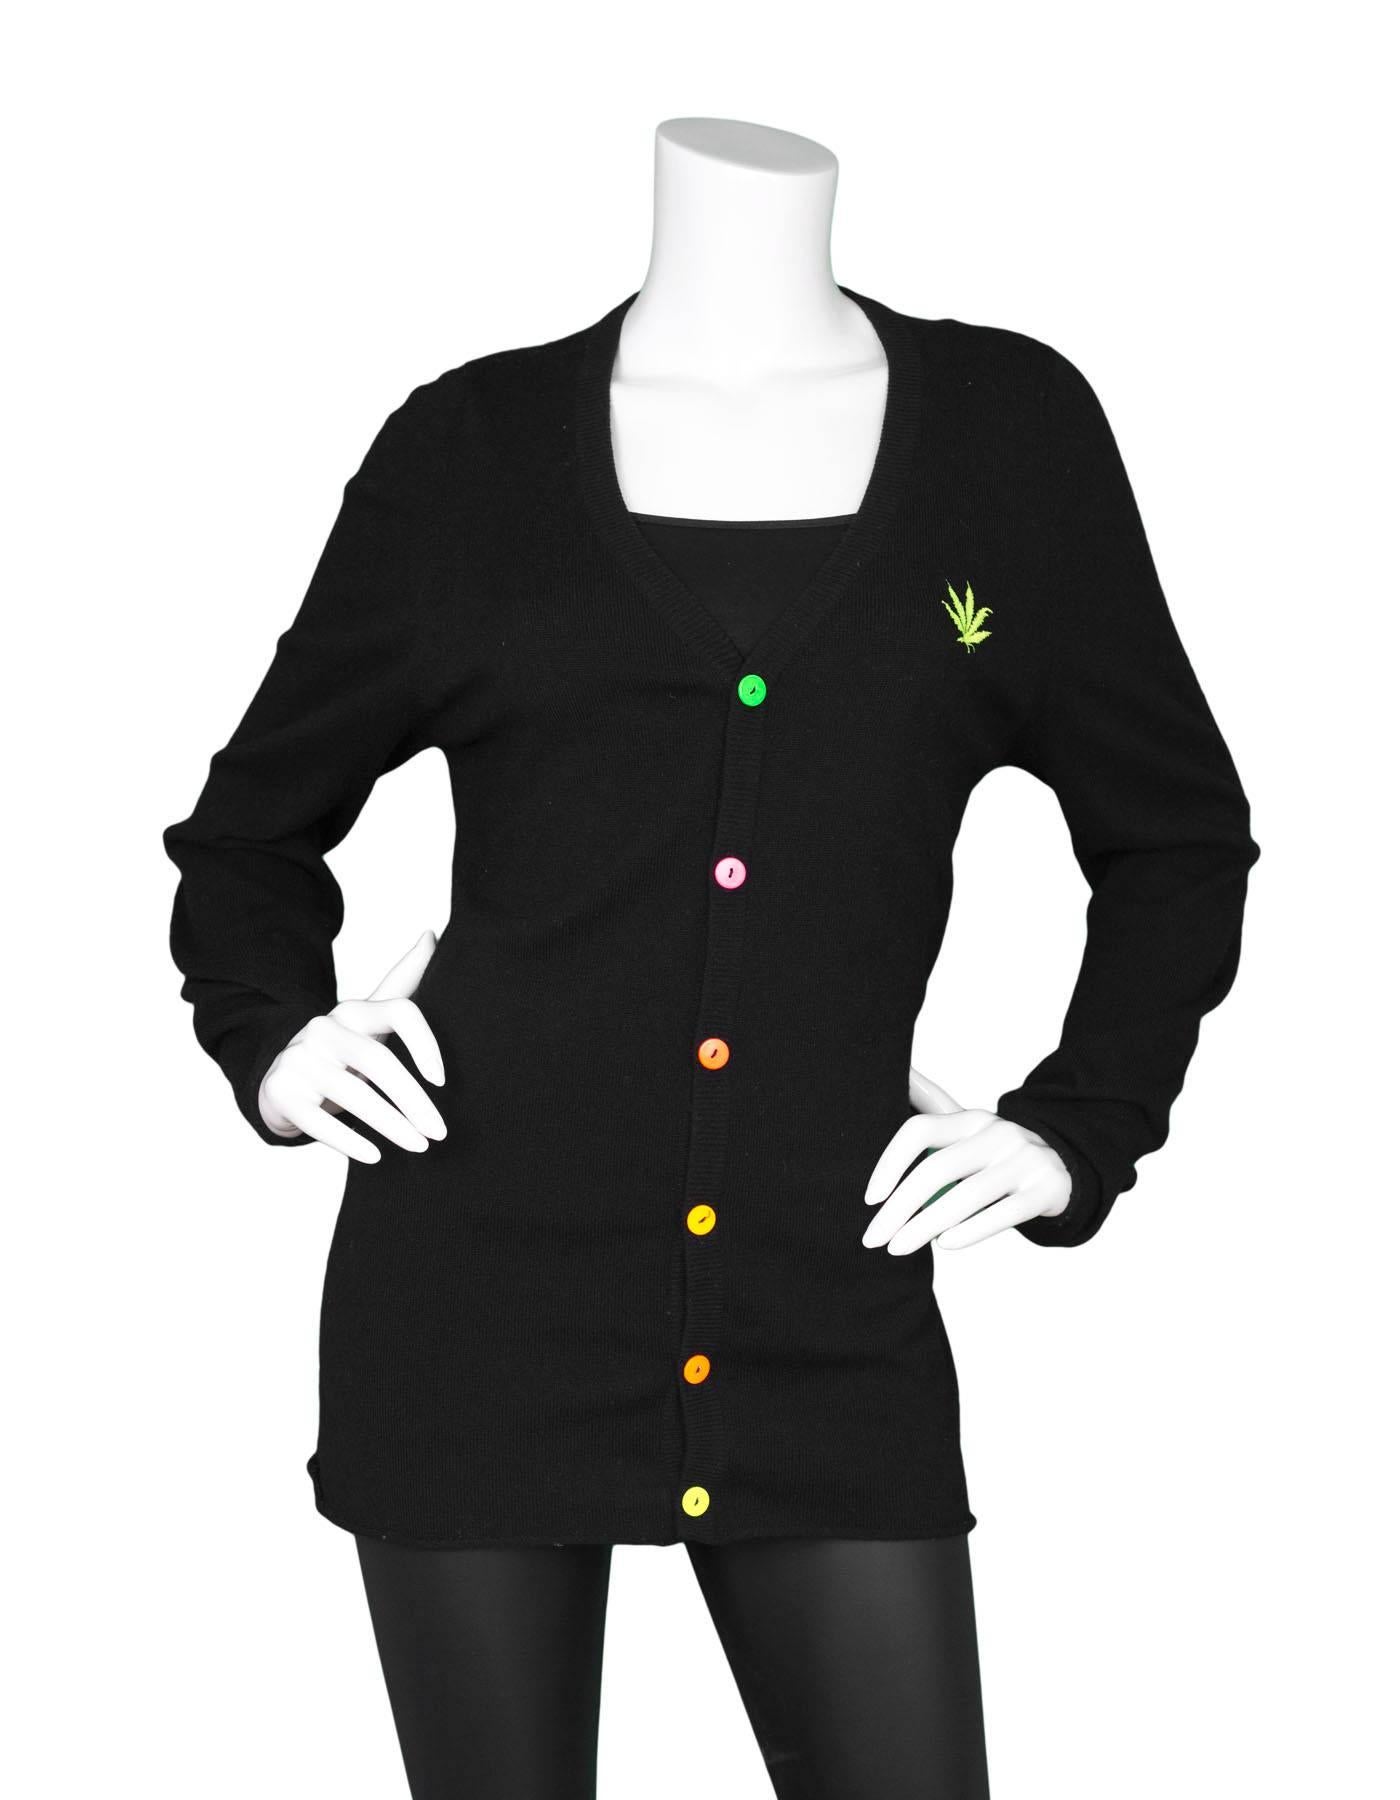 Lucien Pellat-Finet Black Cashmere Cardigan
Features multi-colored neon buttons and neon green leaf embroidery

Made In: Scotland
Color: Black
Composition: 100% Cashmere
Lining: None
Closure/Opening: Button down front
Exterior Pockets: None
Interior